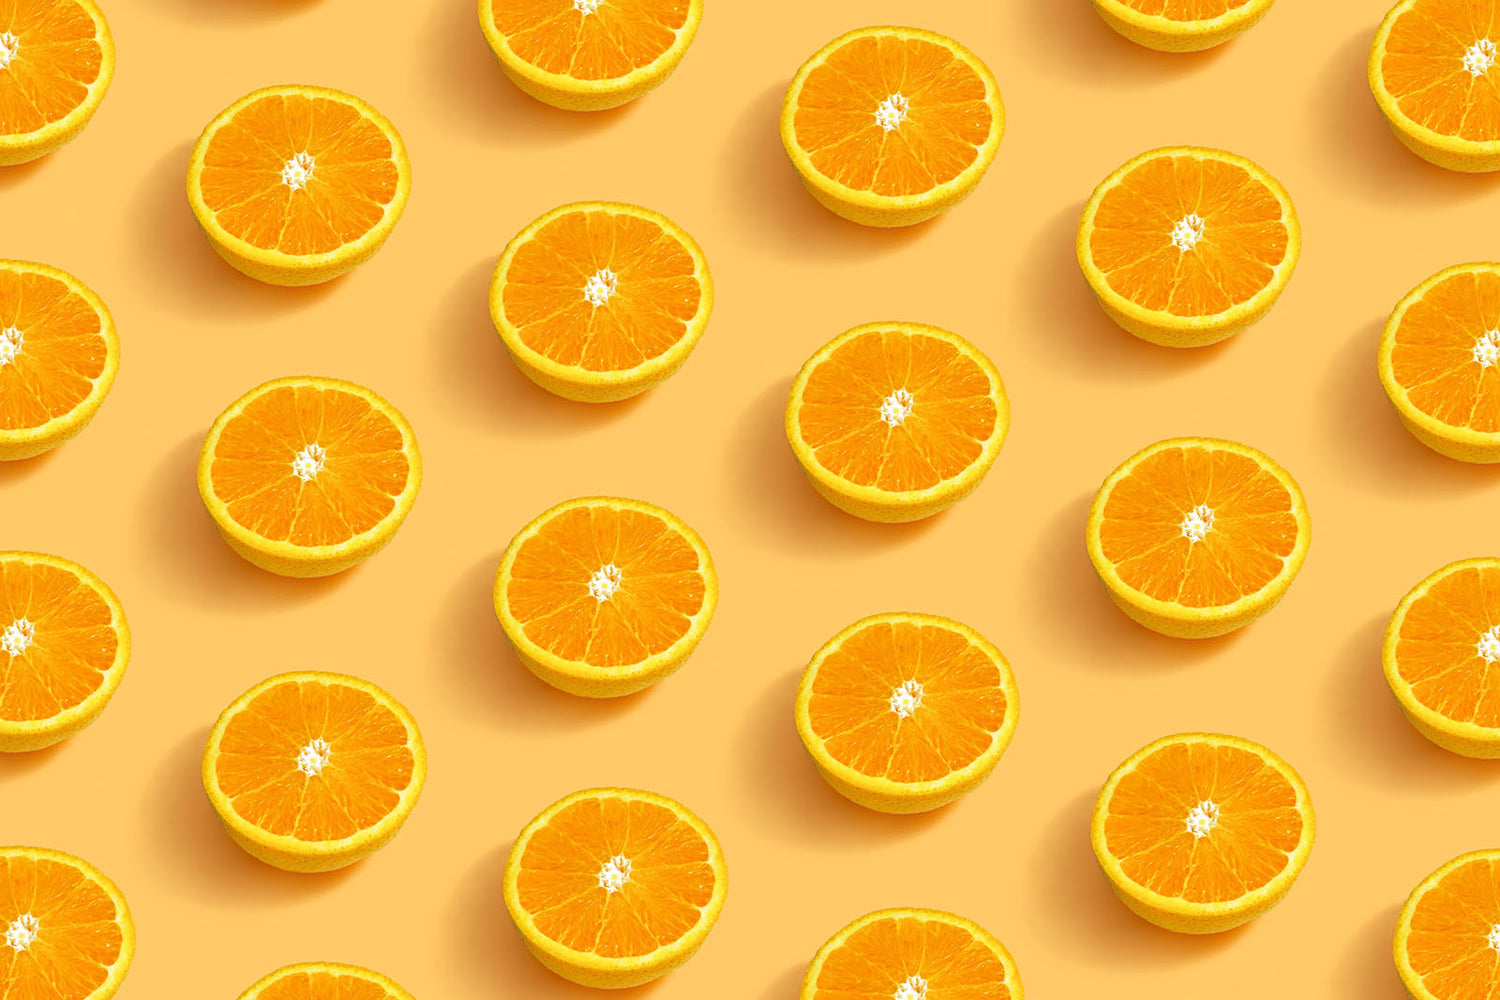 Bright and fun image from above showing pattern of sliced oranges on light orange background